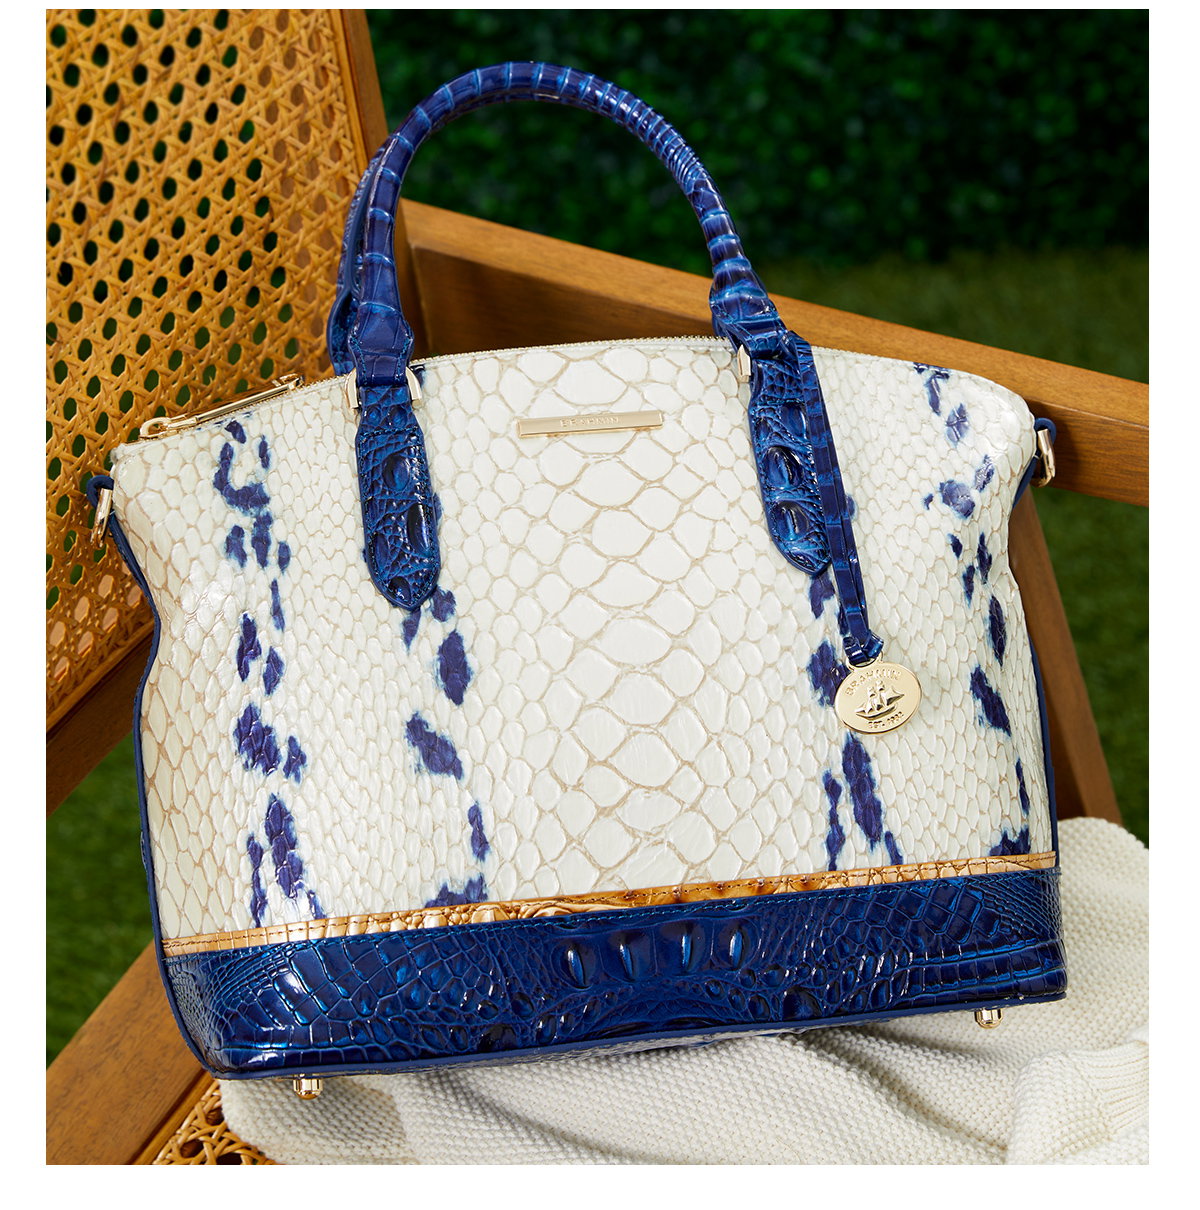 Brahmin Handbags - Add a little Spring to your Sunday with the